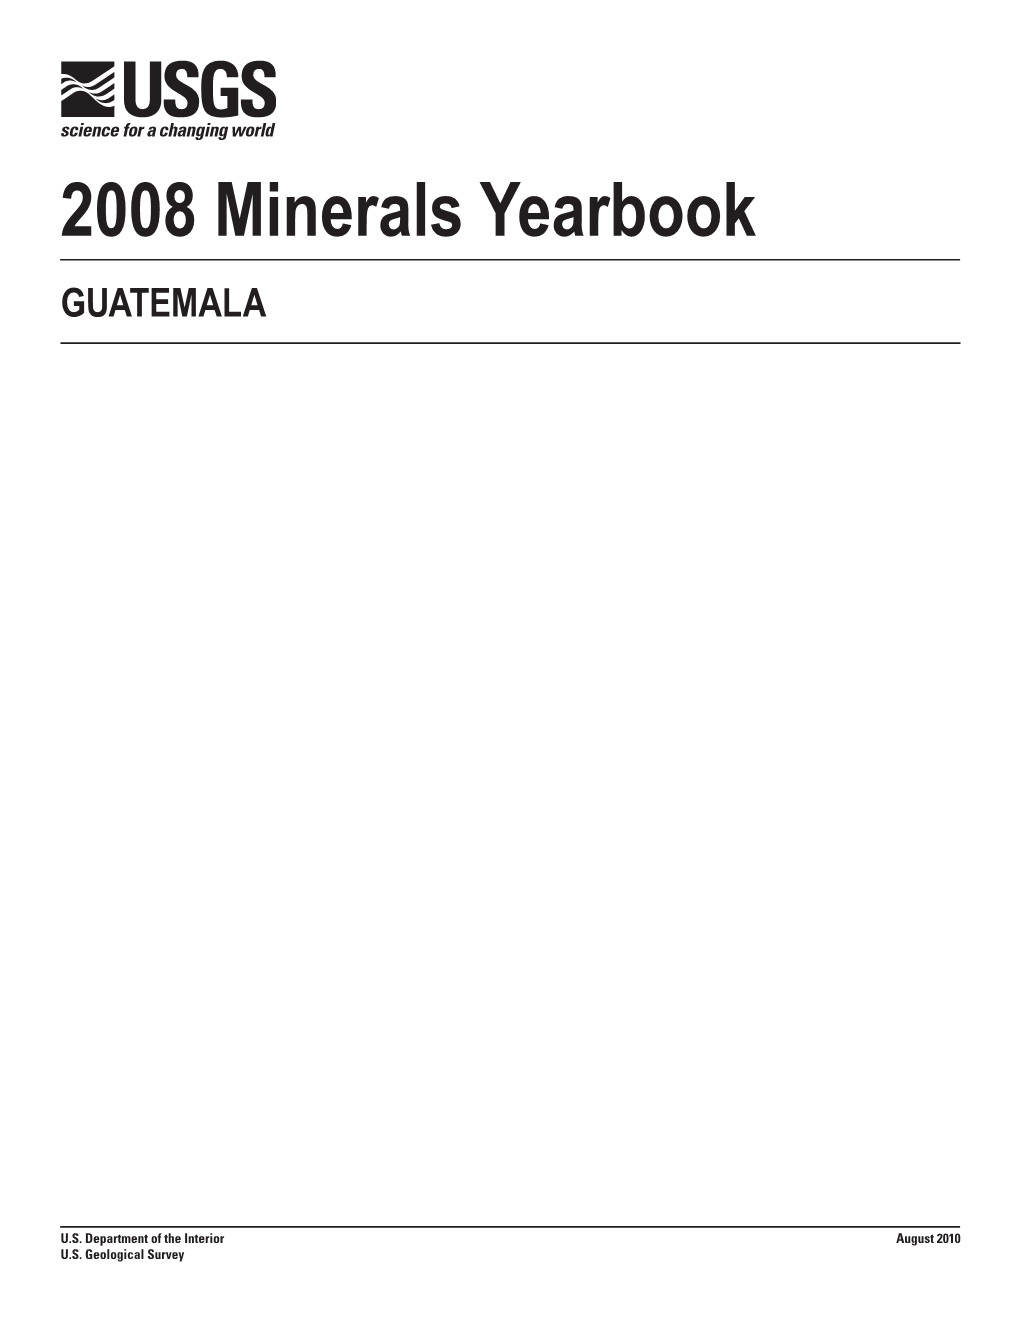 The Mineral Industry of Guatemala in 2008